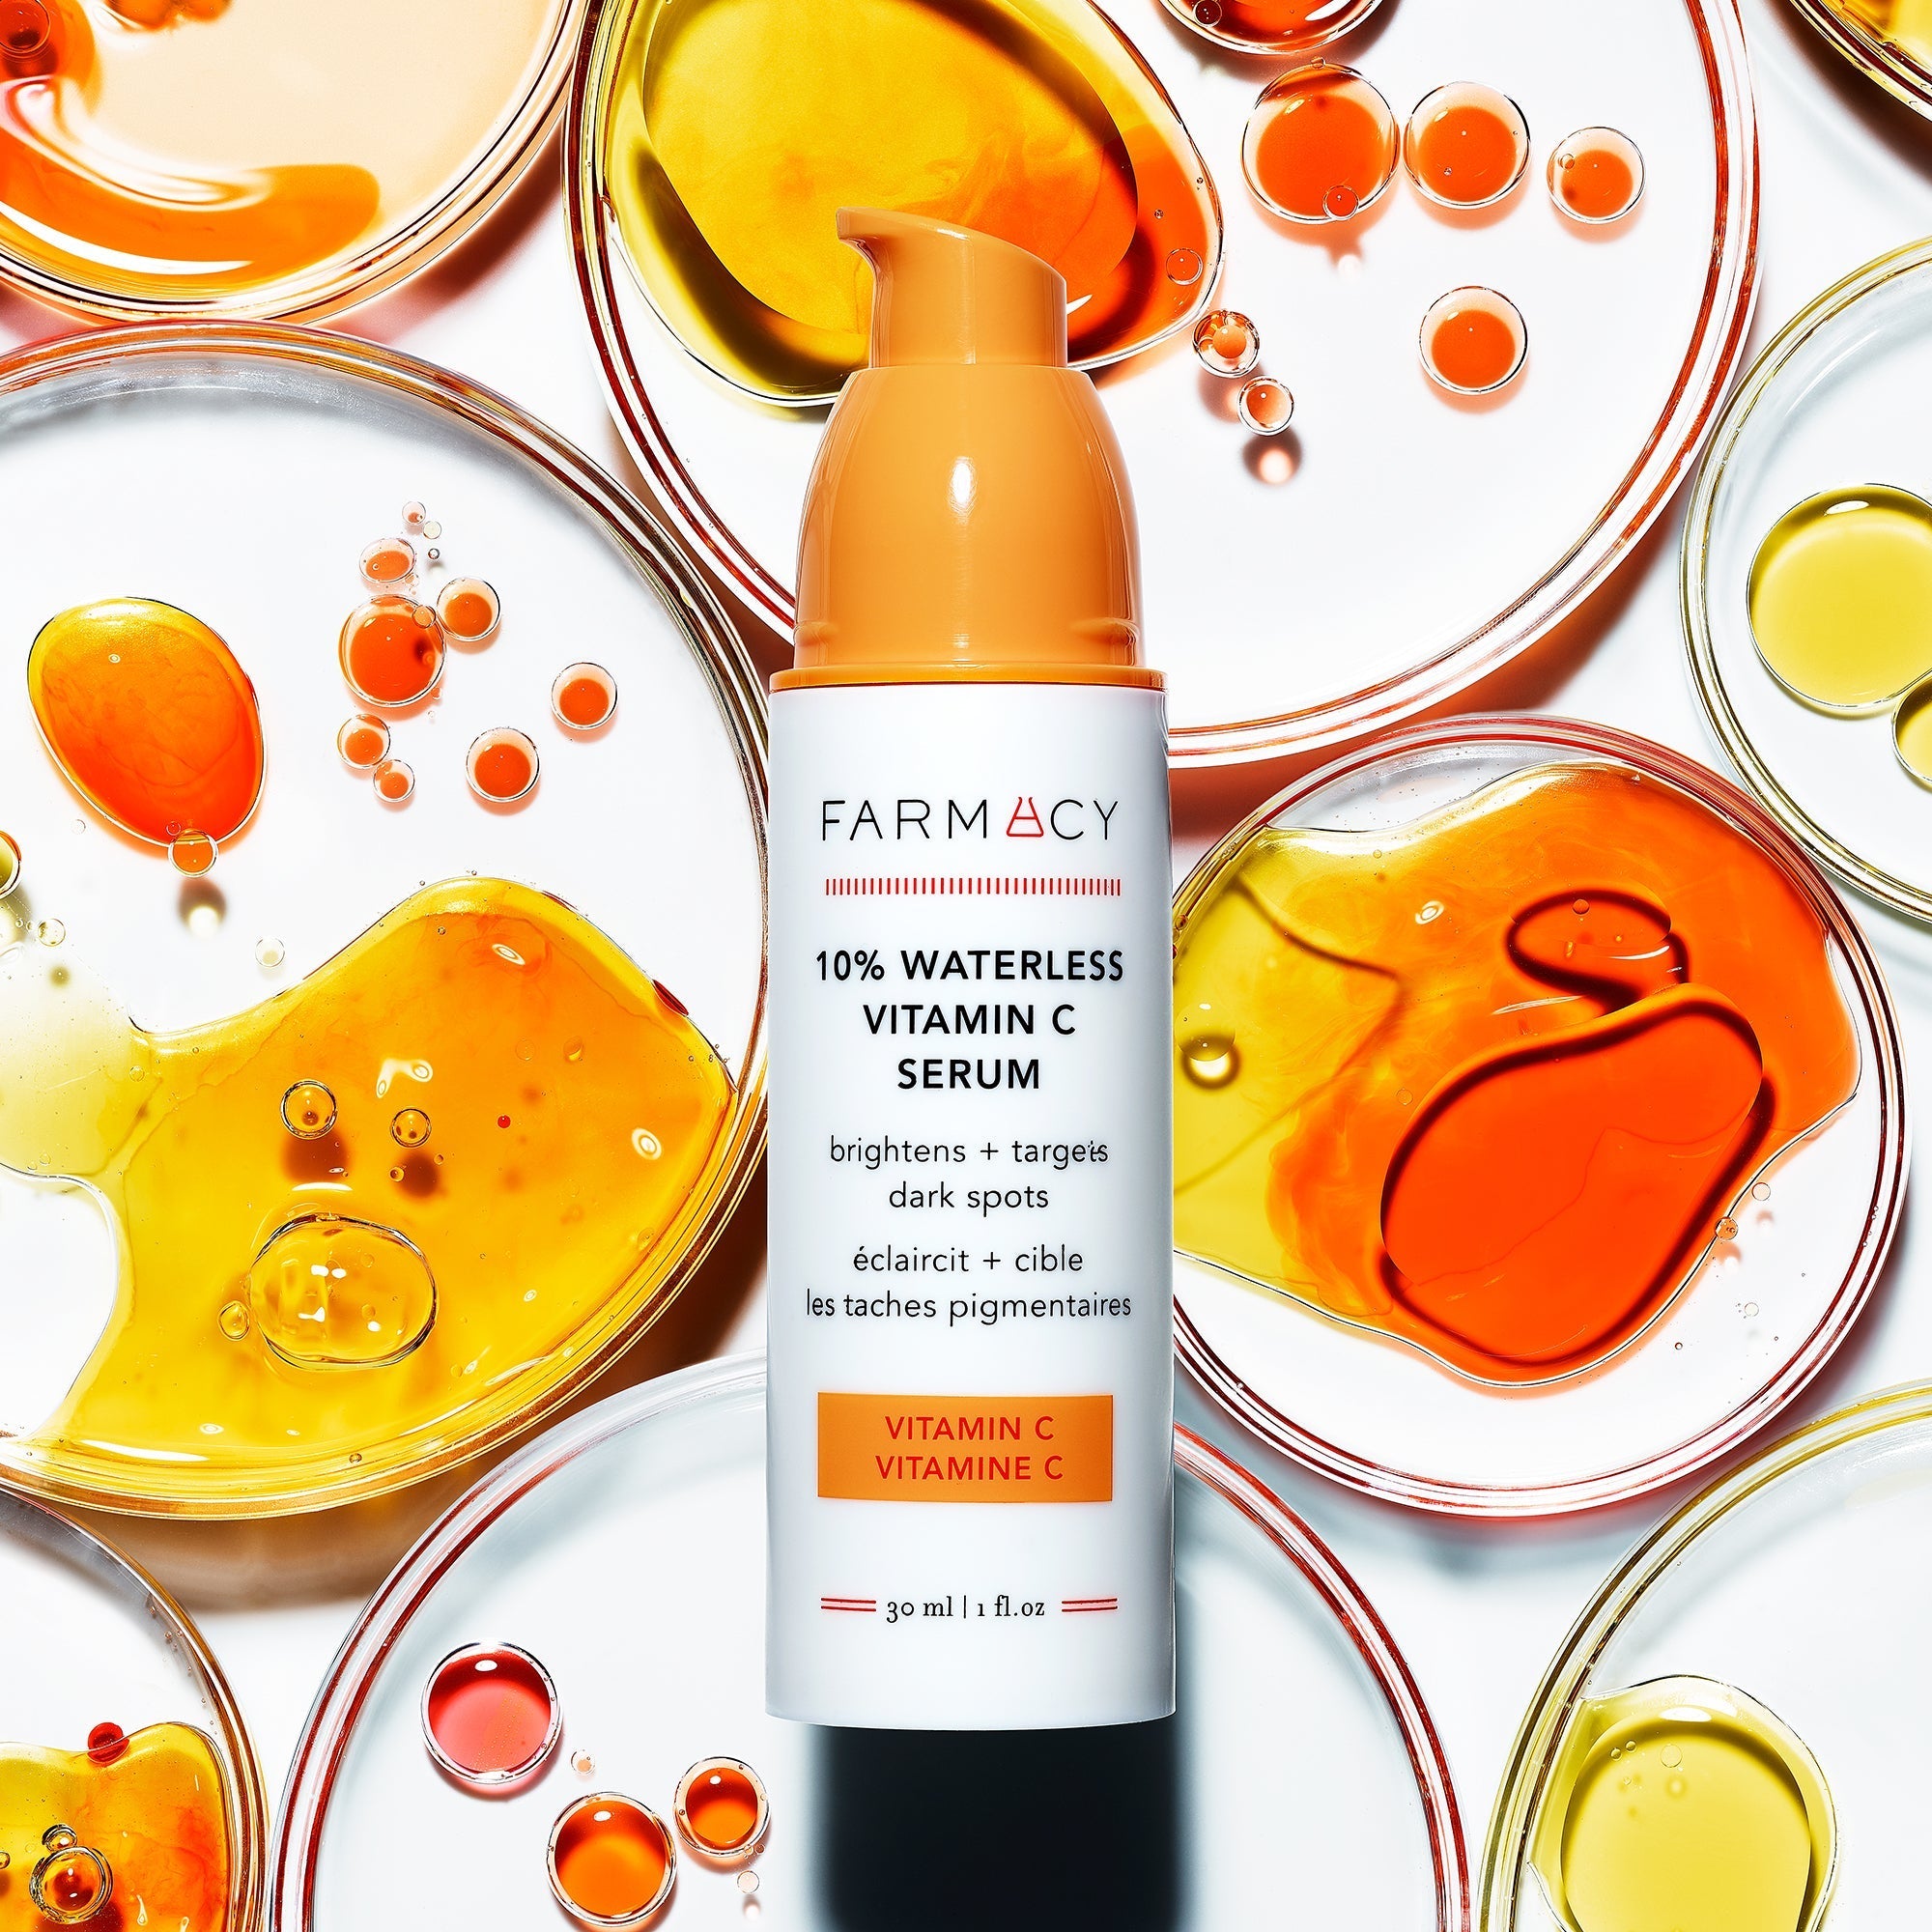 A bottle of 10% Waterless Vitamin C Serum with Vitamin C petri dishes behind it 